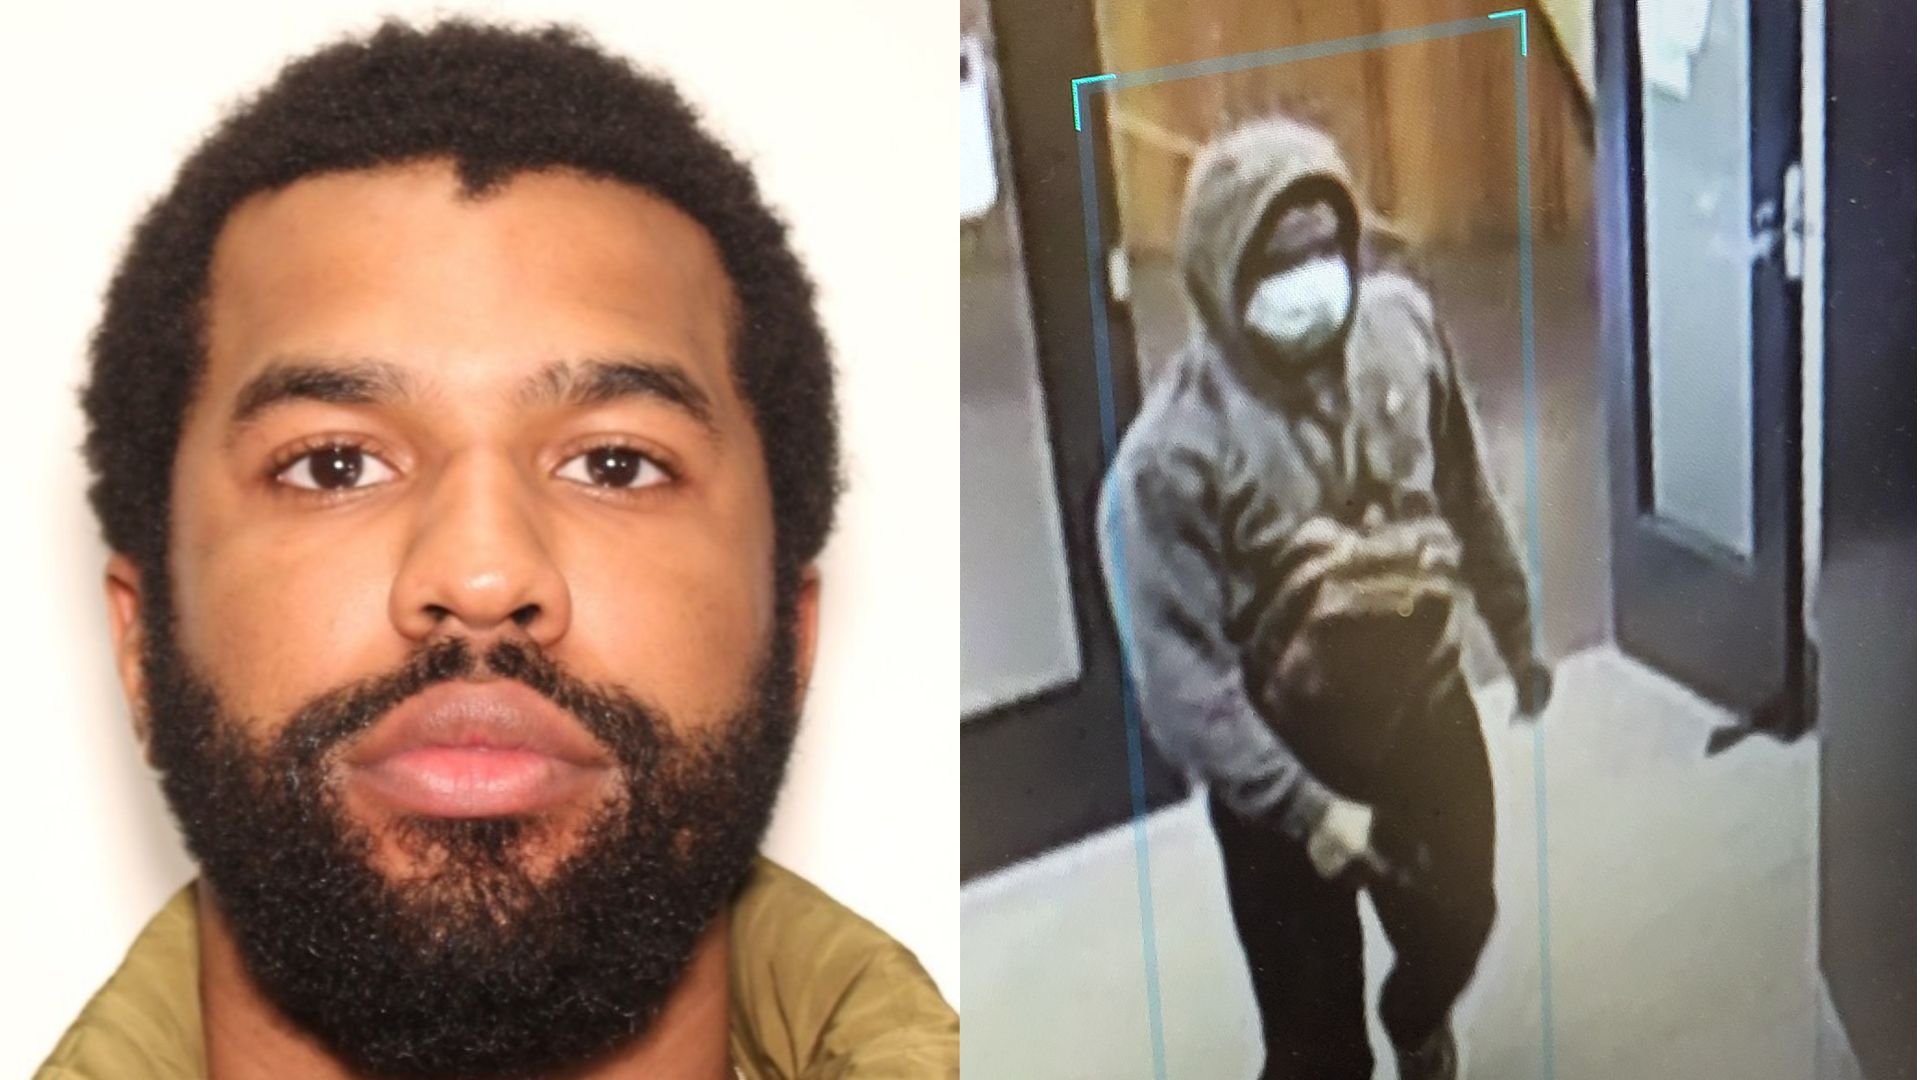 Atlanta Shooting: This is the Shooter – Manhunt for His Arrest